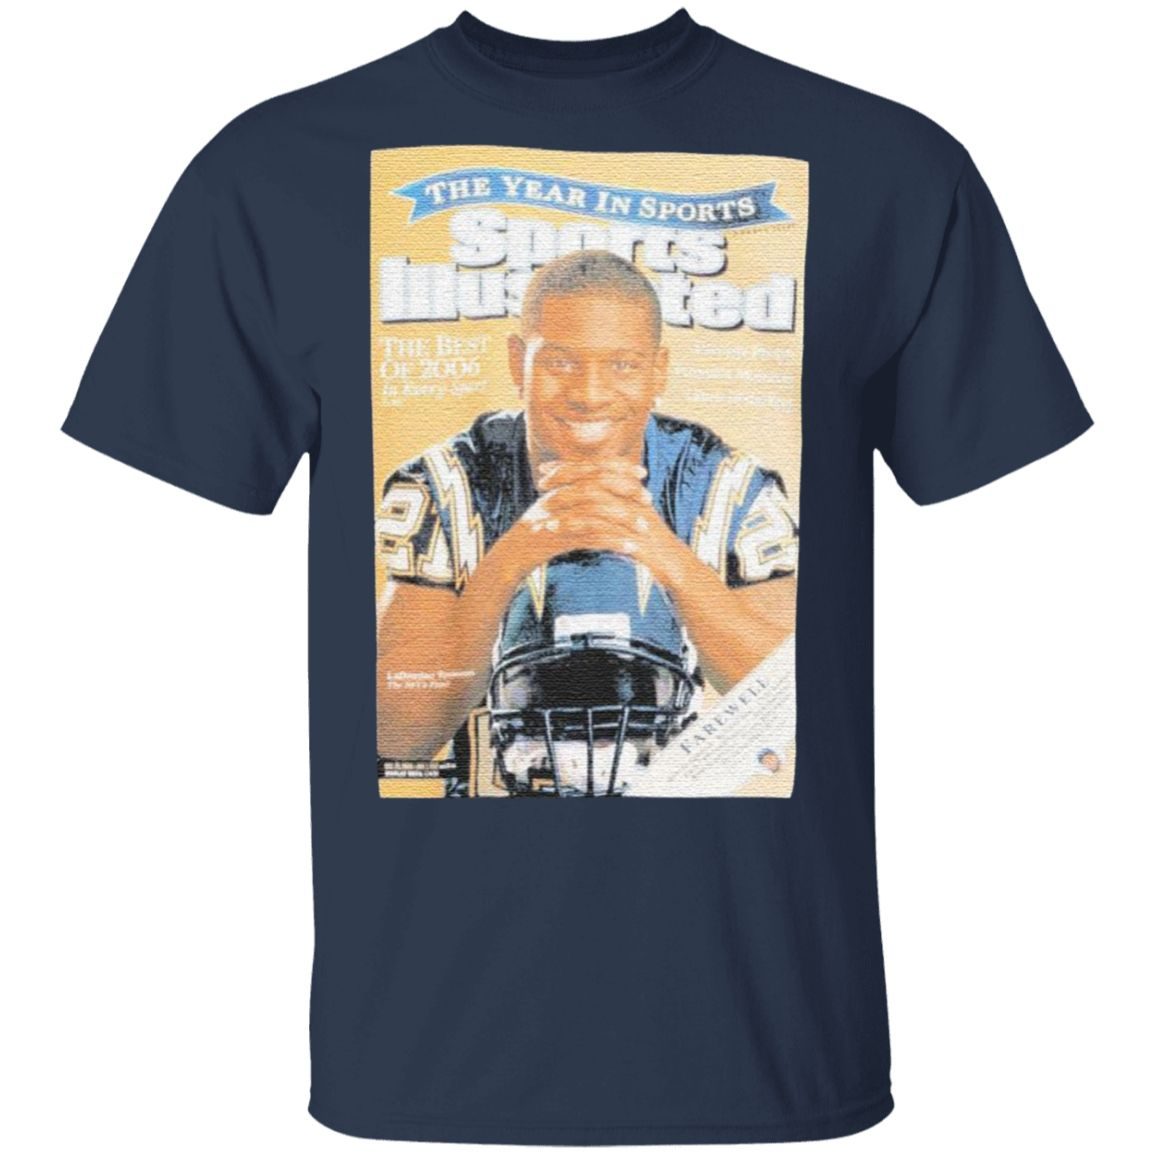 Cover Tee San Diego Chargers 2009 Ladainian Tomlinson t shirt